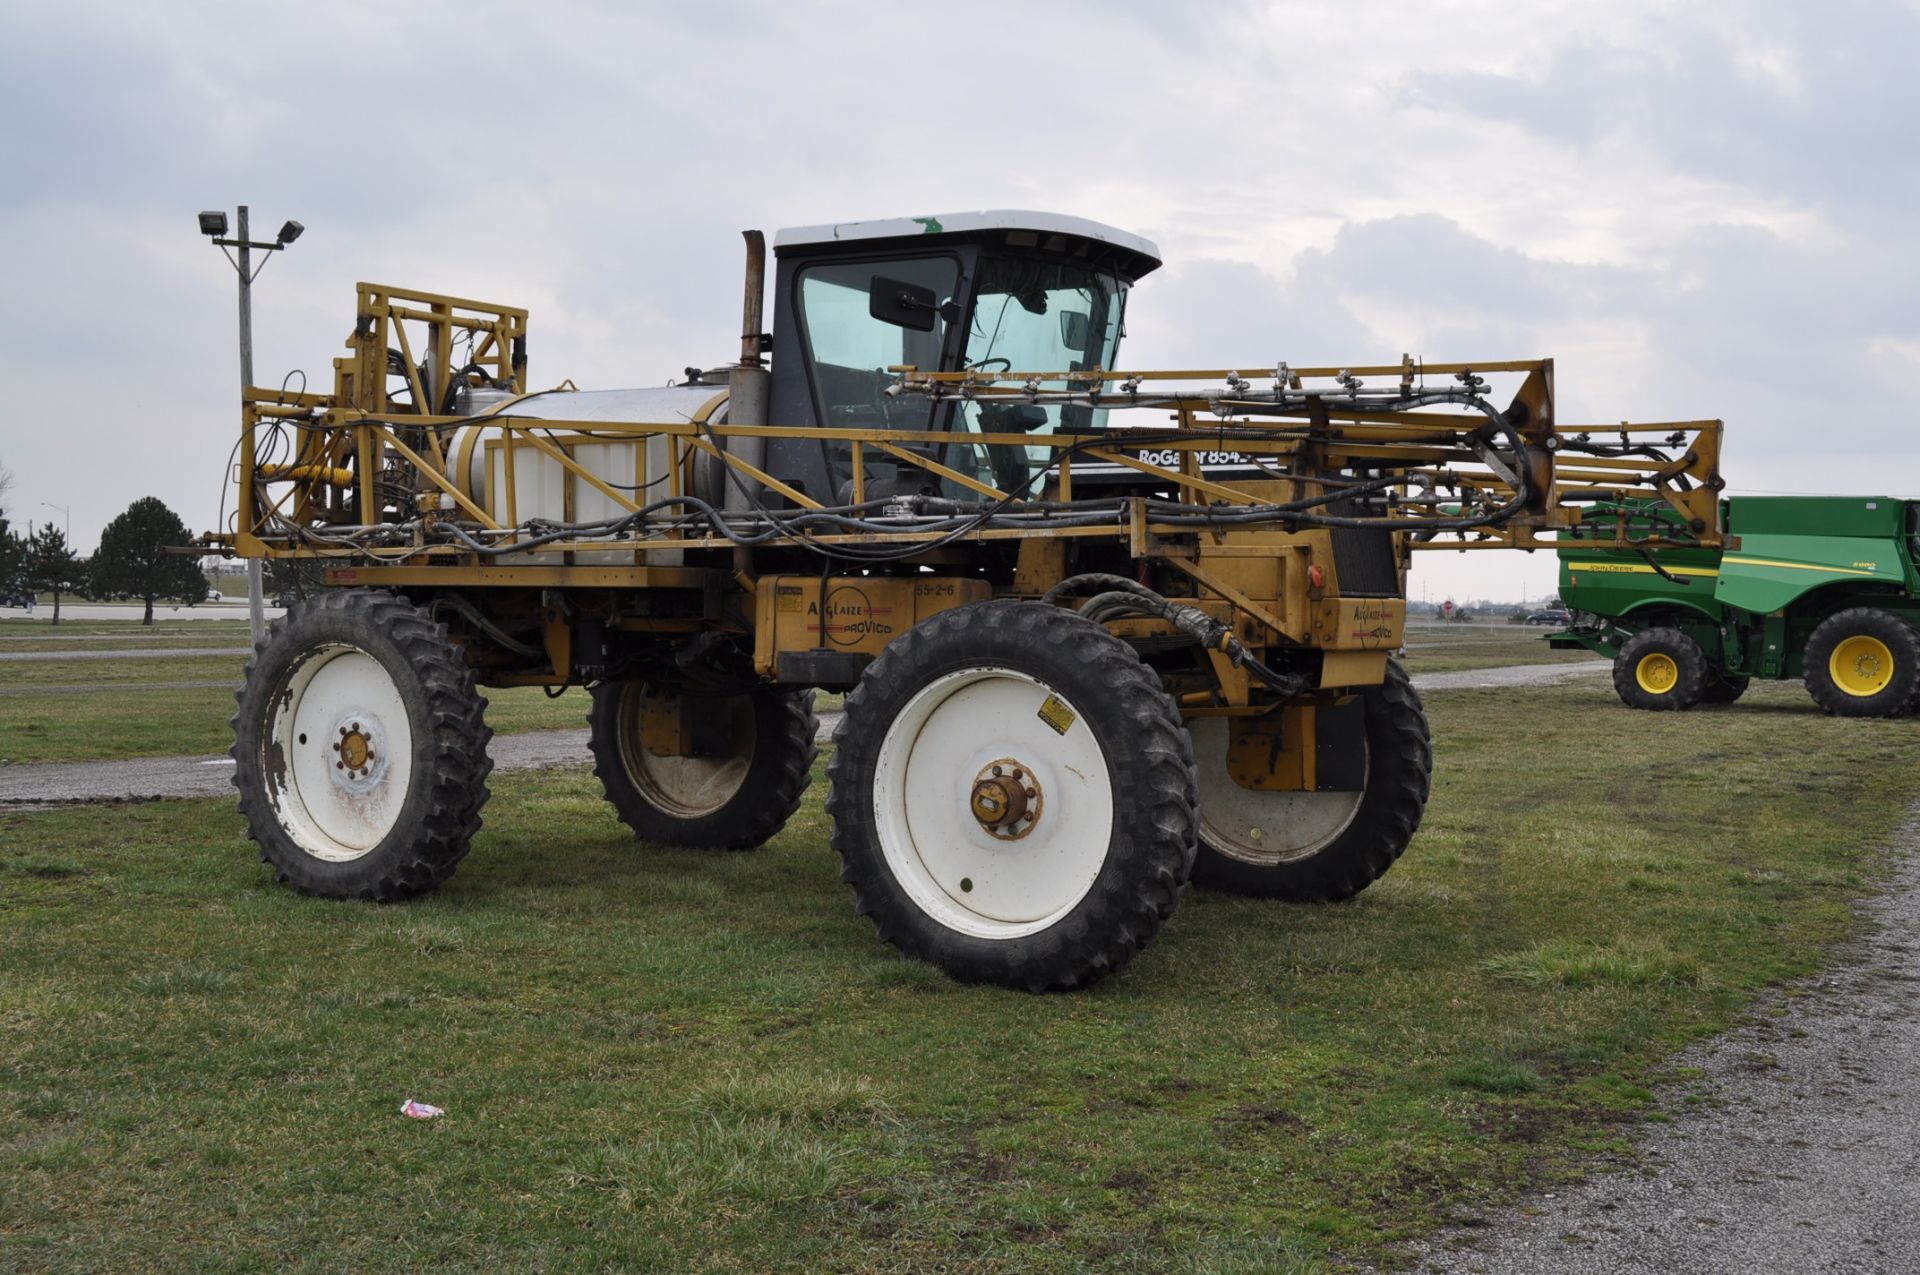 1996 Rogator 854 w/80’ booms, 800 gallon SS tank, 4748 hrs - Image 6 of 20